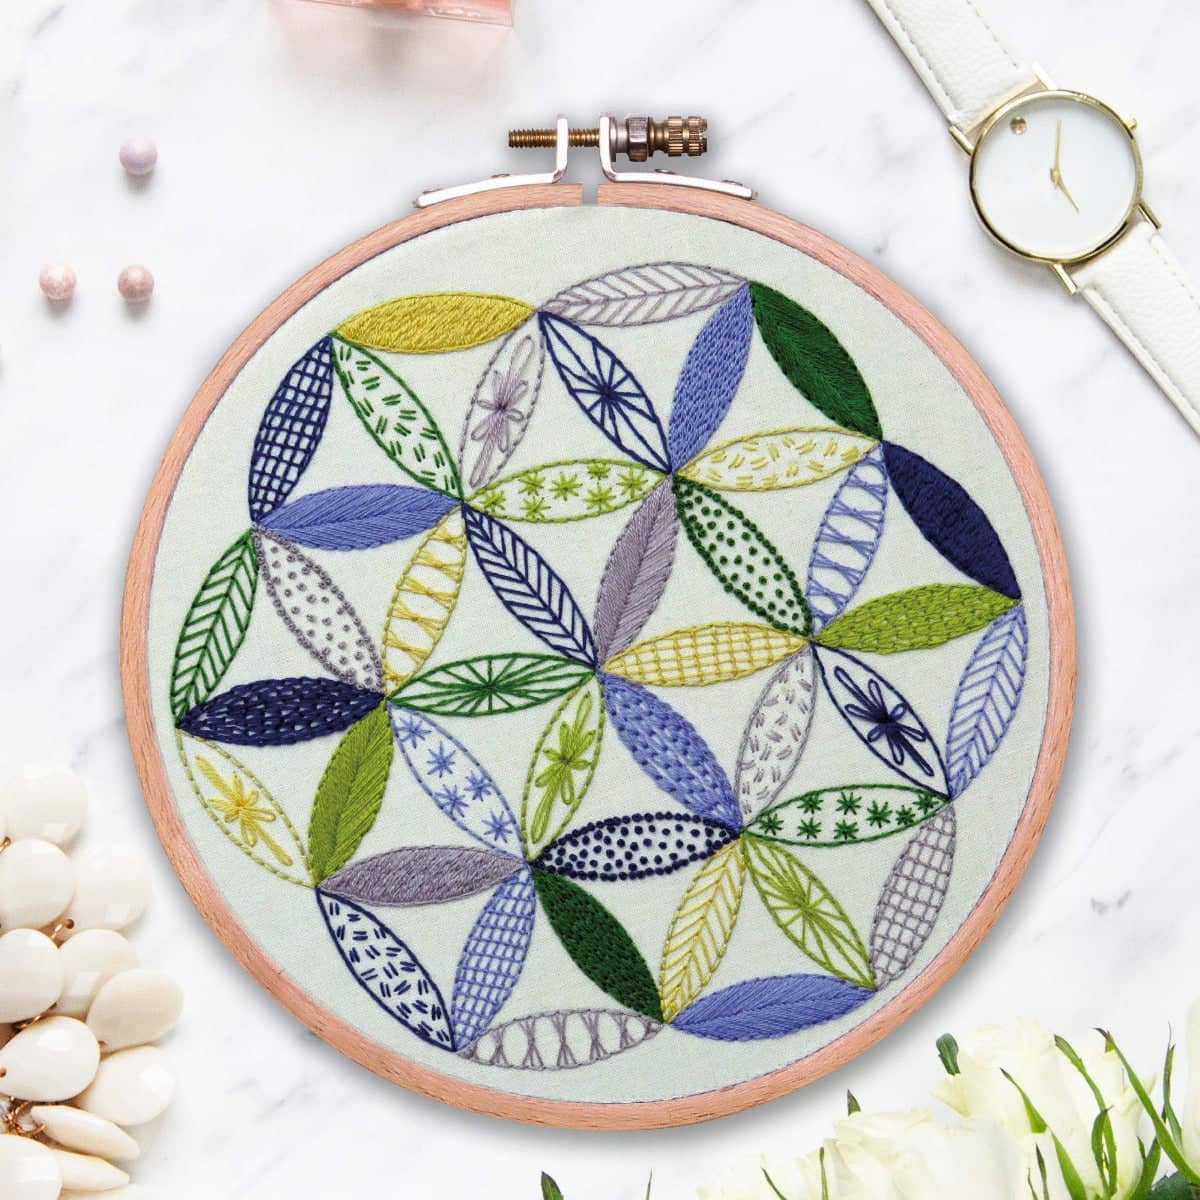 Beginners Embroidery Stitch Practice kit, 3 Sets Embroidery Kit to Learn 30  Different Stitches for Craft Lover Hand Stitch with Embroidery Fabric with